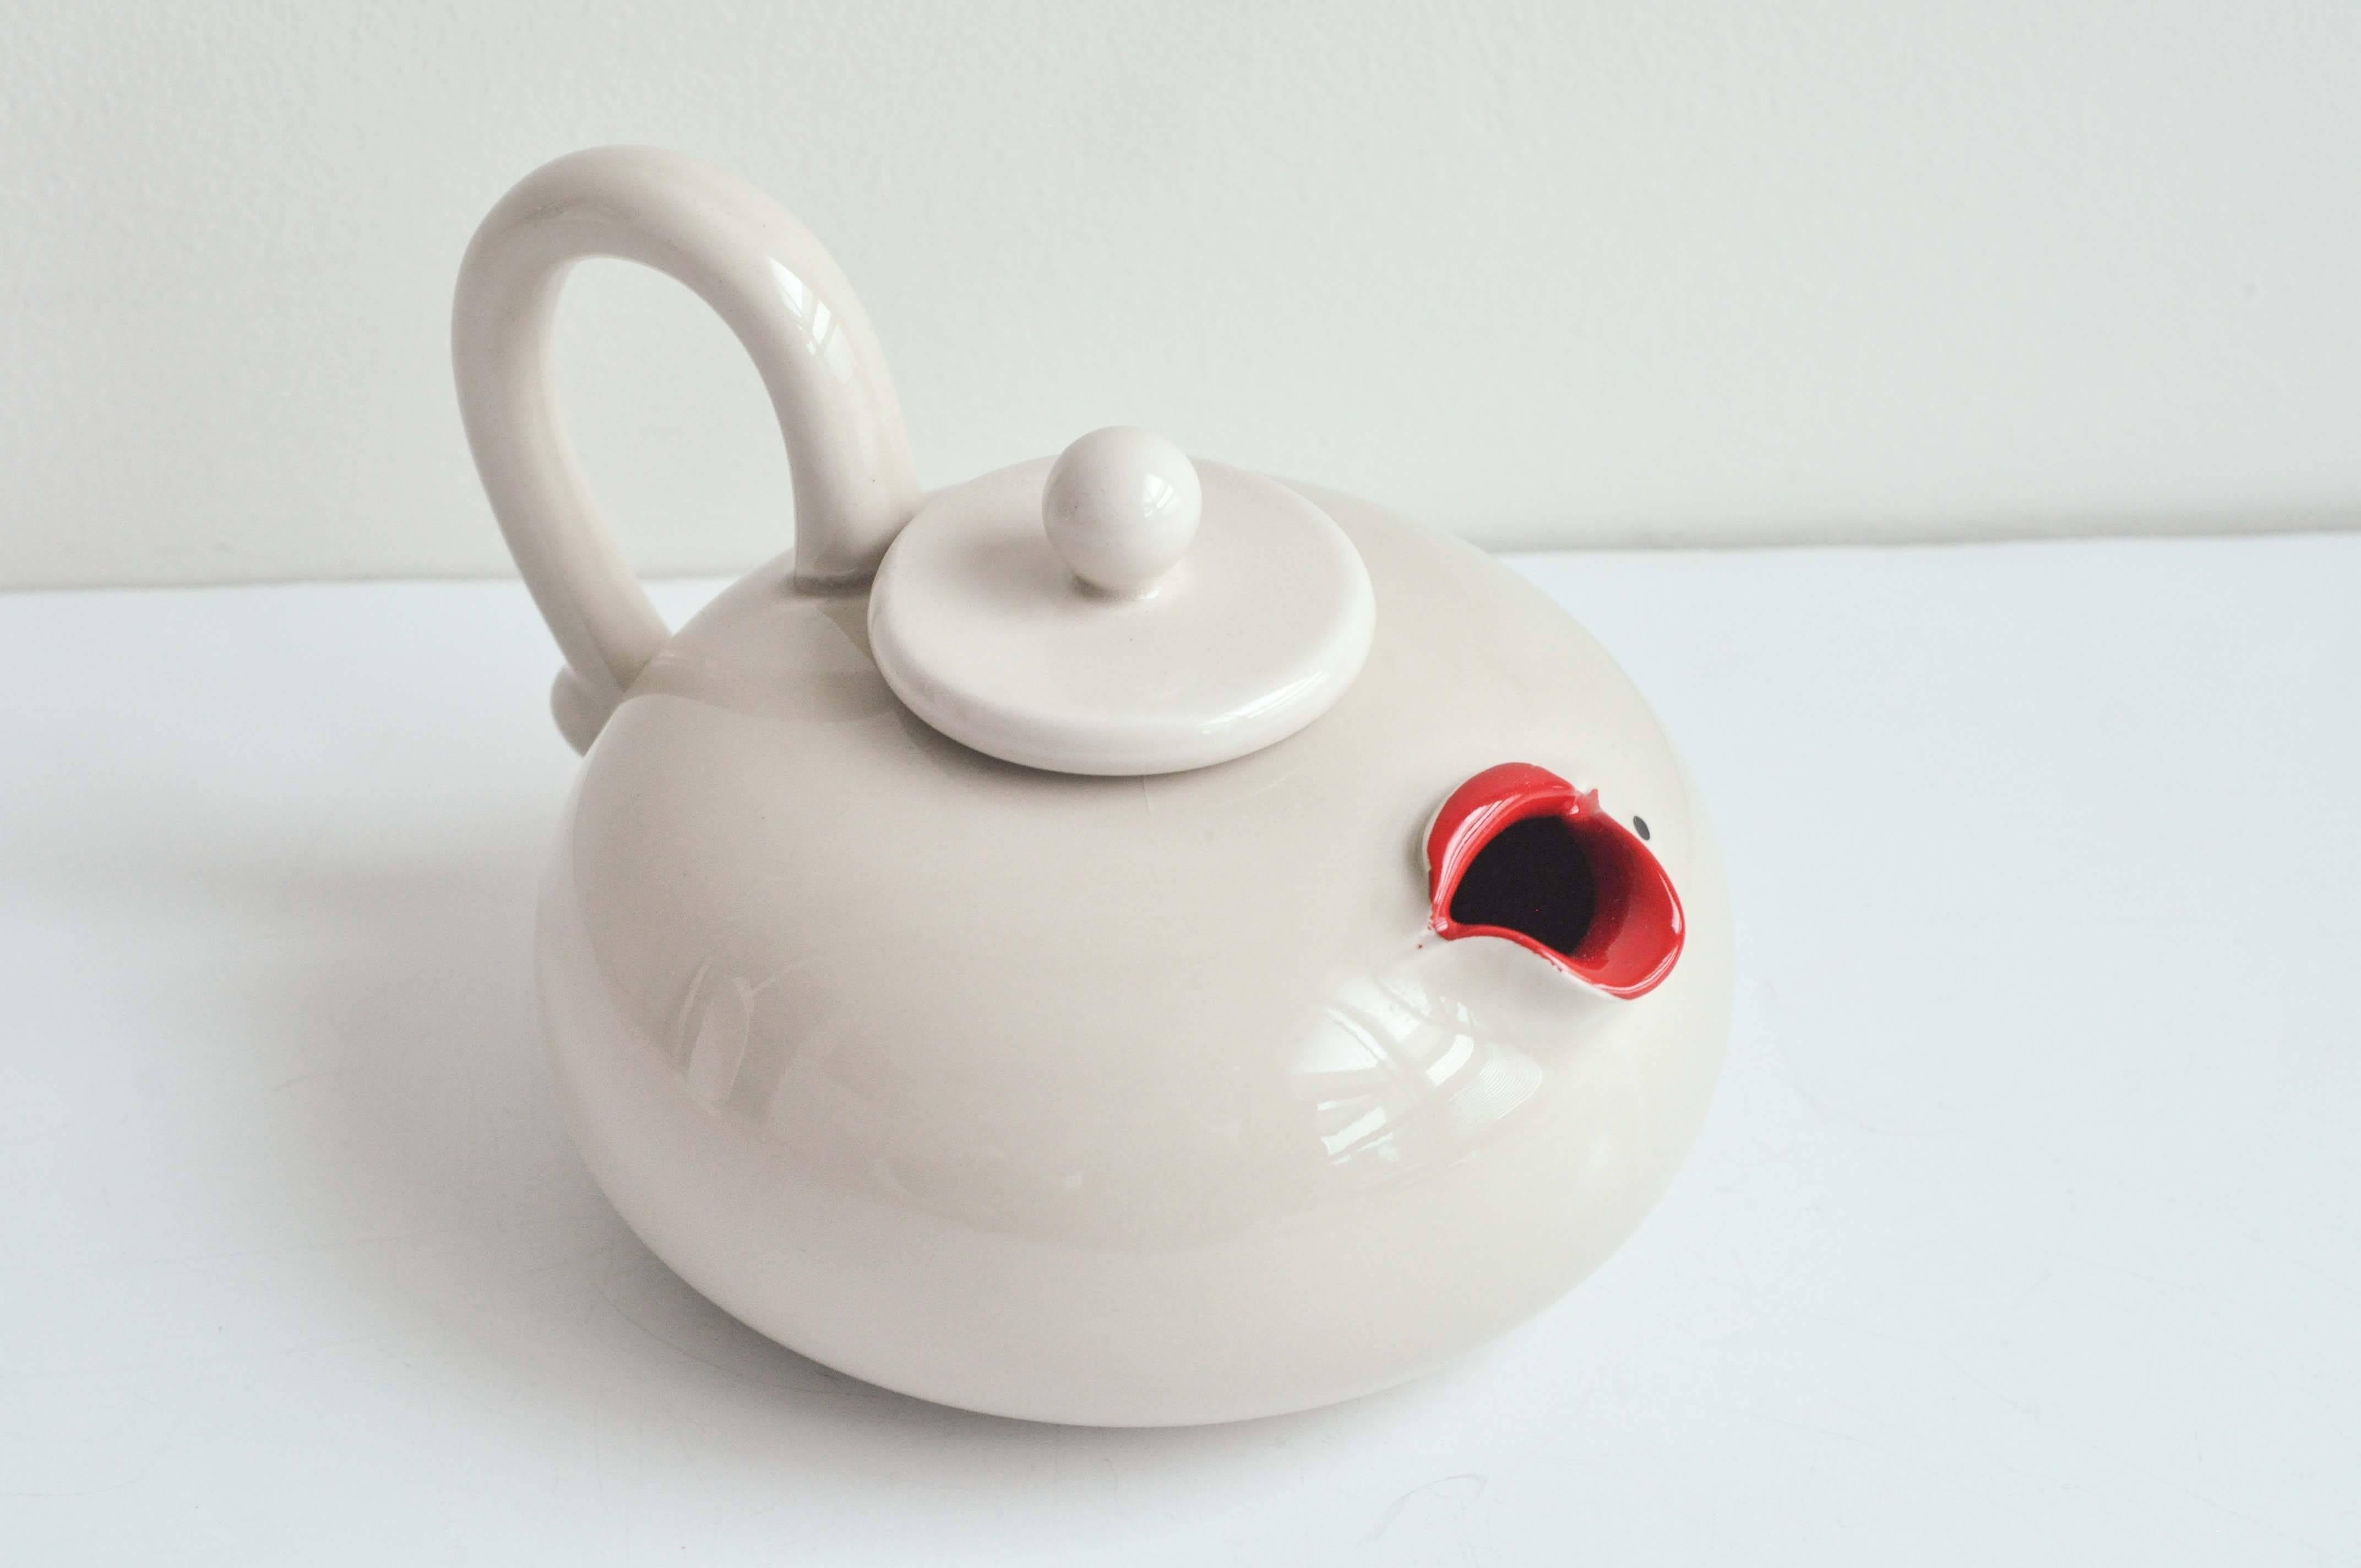 A novelty teapot designed by Fitz and Floyd that alludes to Marilyn Monroe's lips complete with beauty mark. A clever, witty design and a great example of Pop Art from the seventies in excellent condition. Incised mark and original paper label.